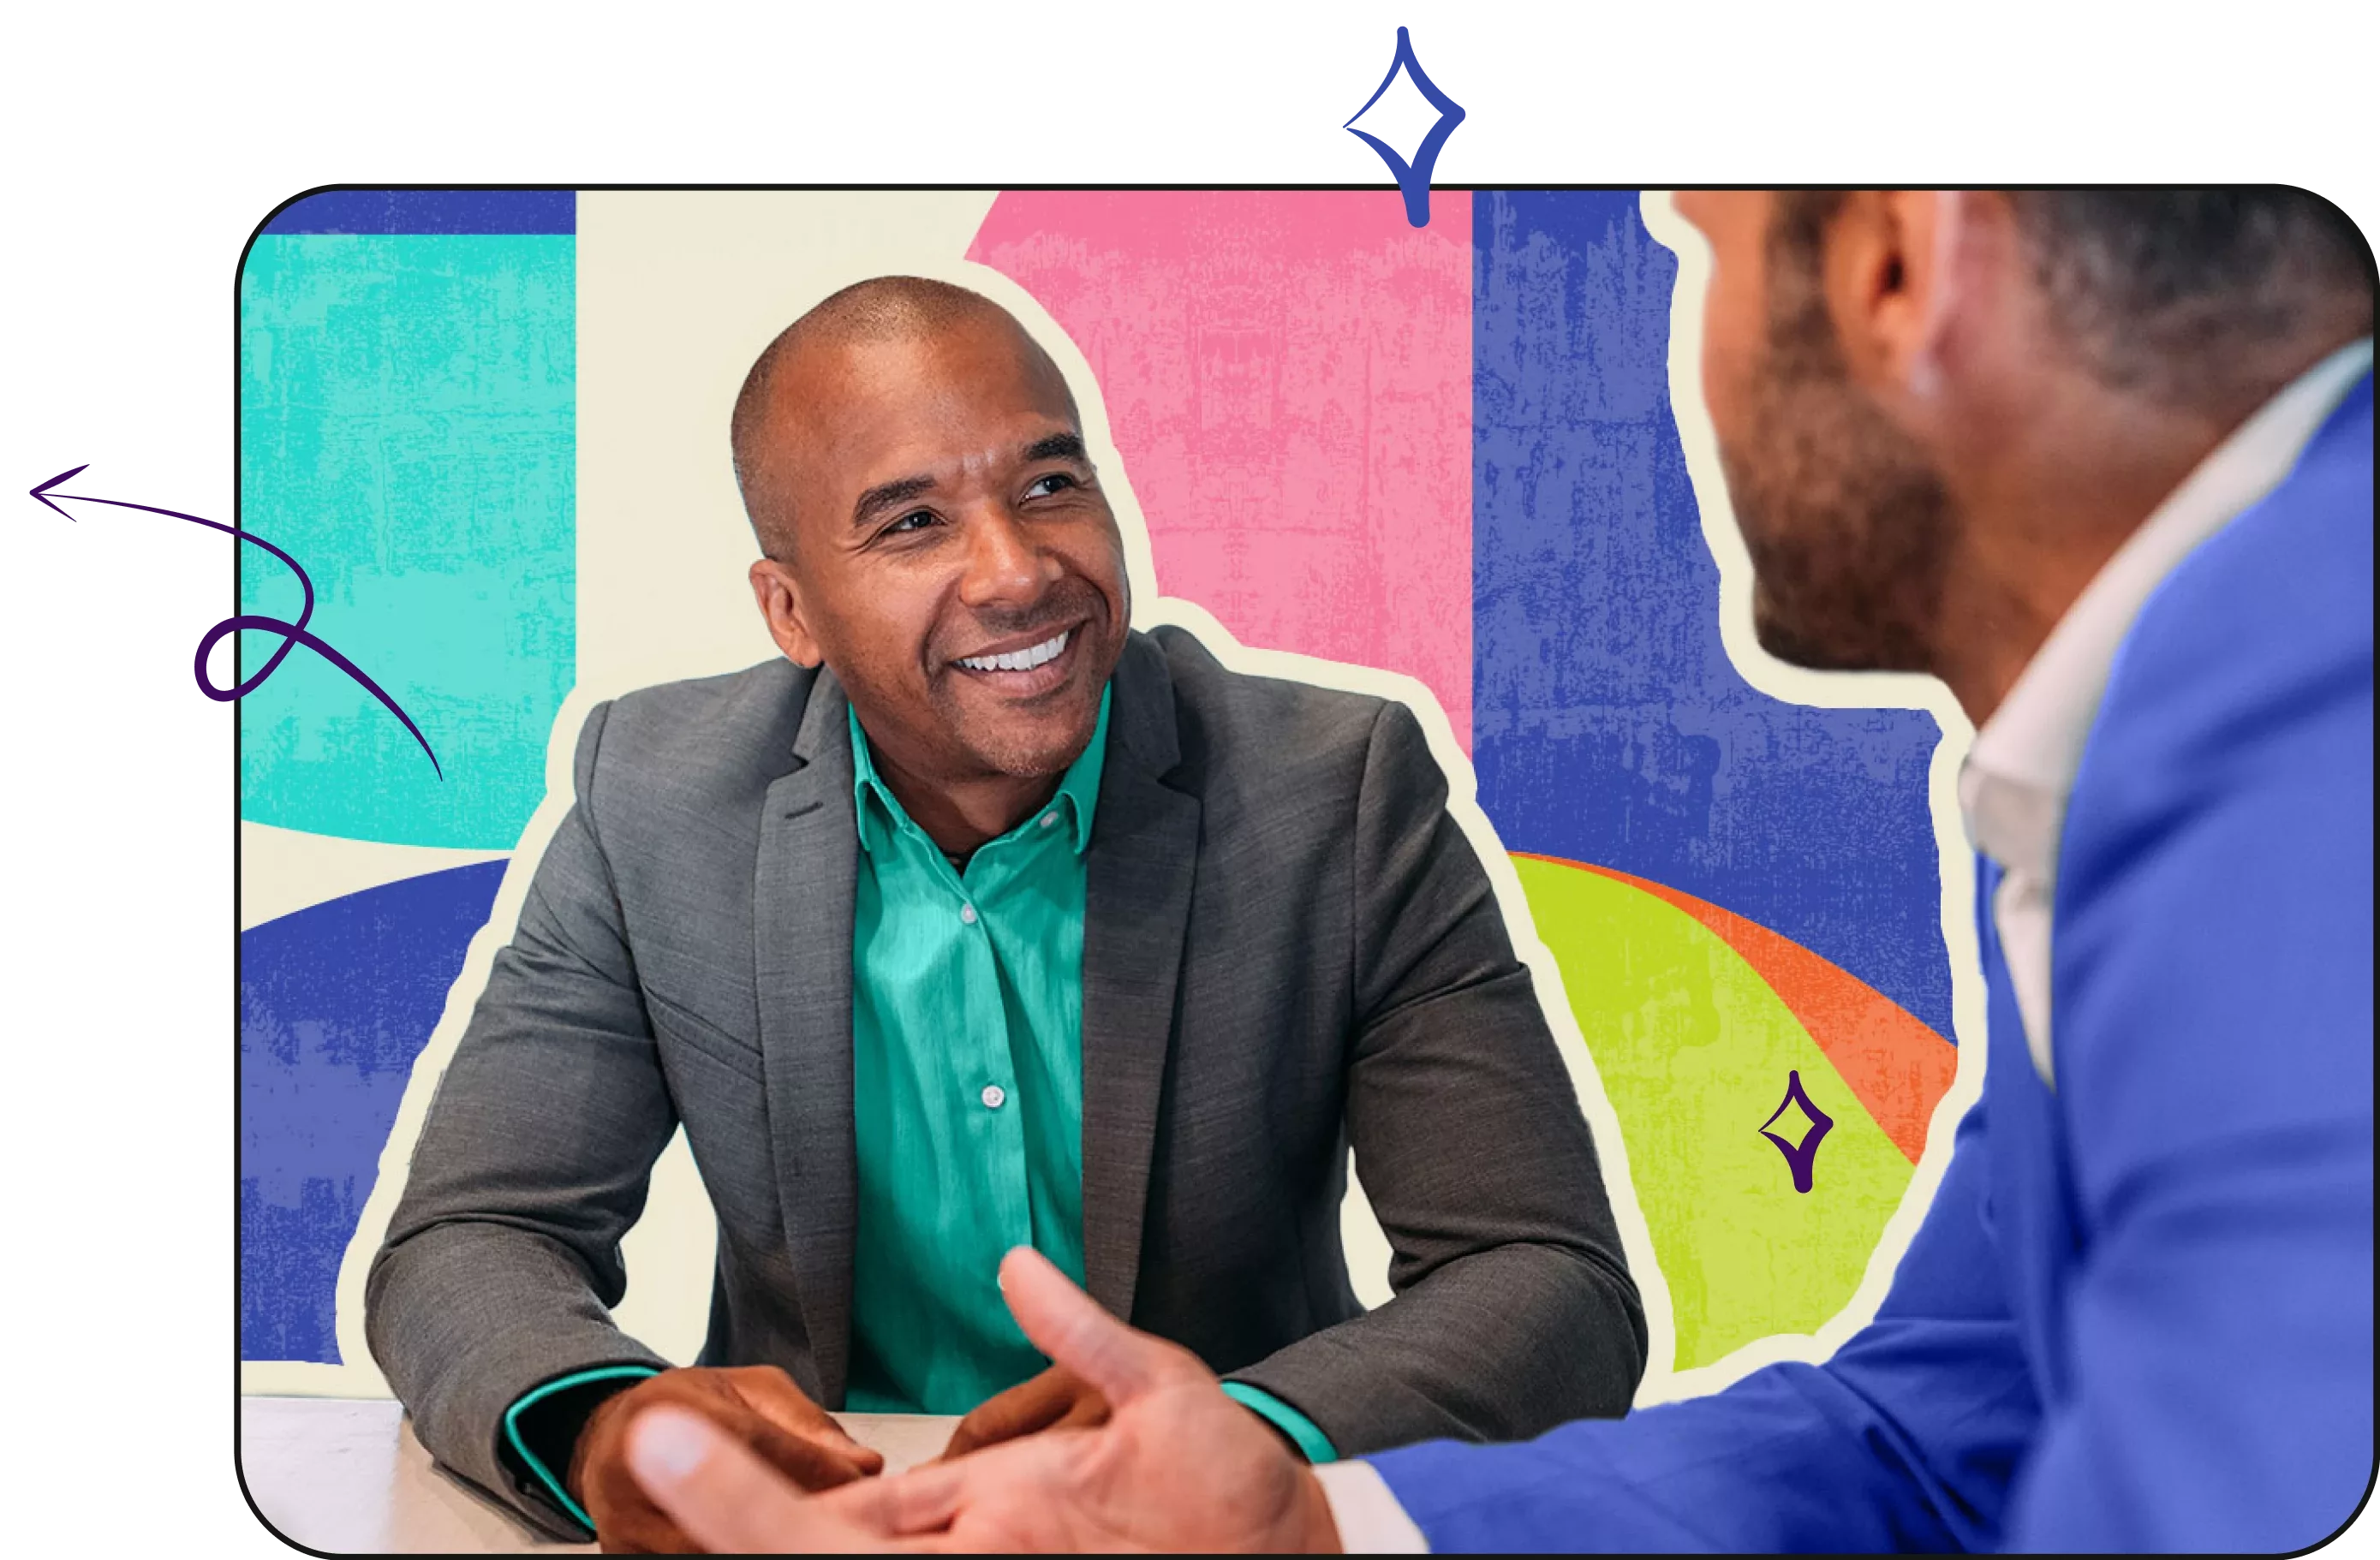 Two business men of color seated at a table discussing business with a stylized colorful background.